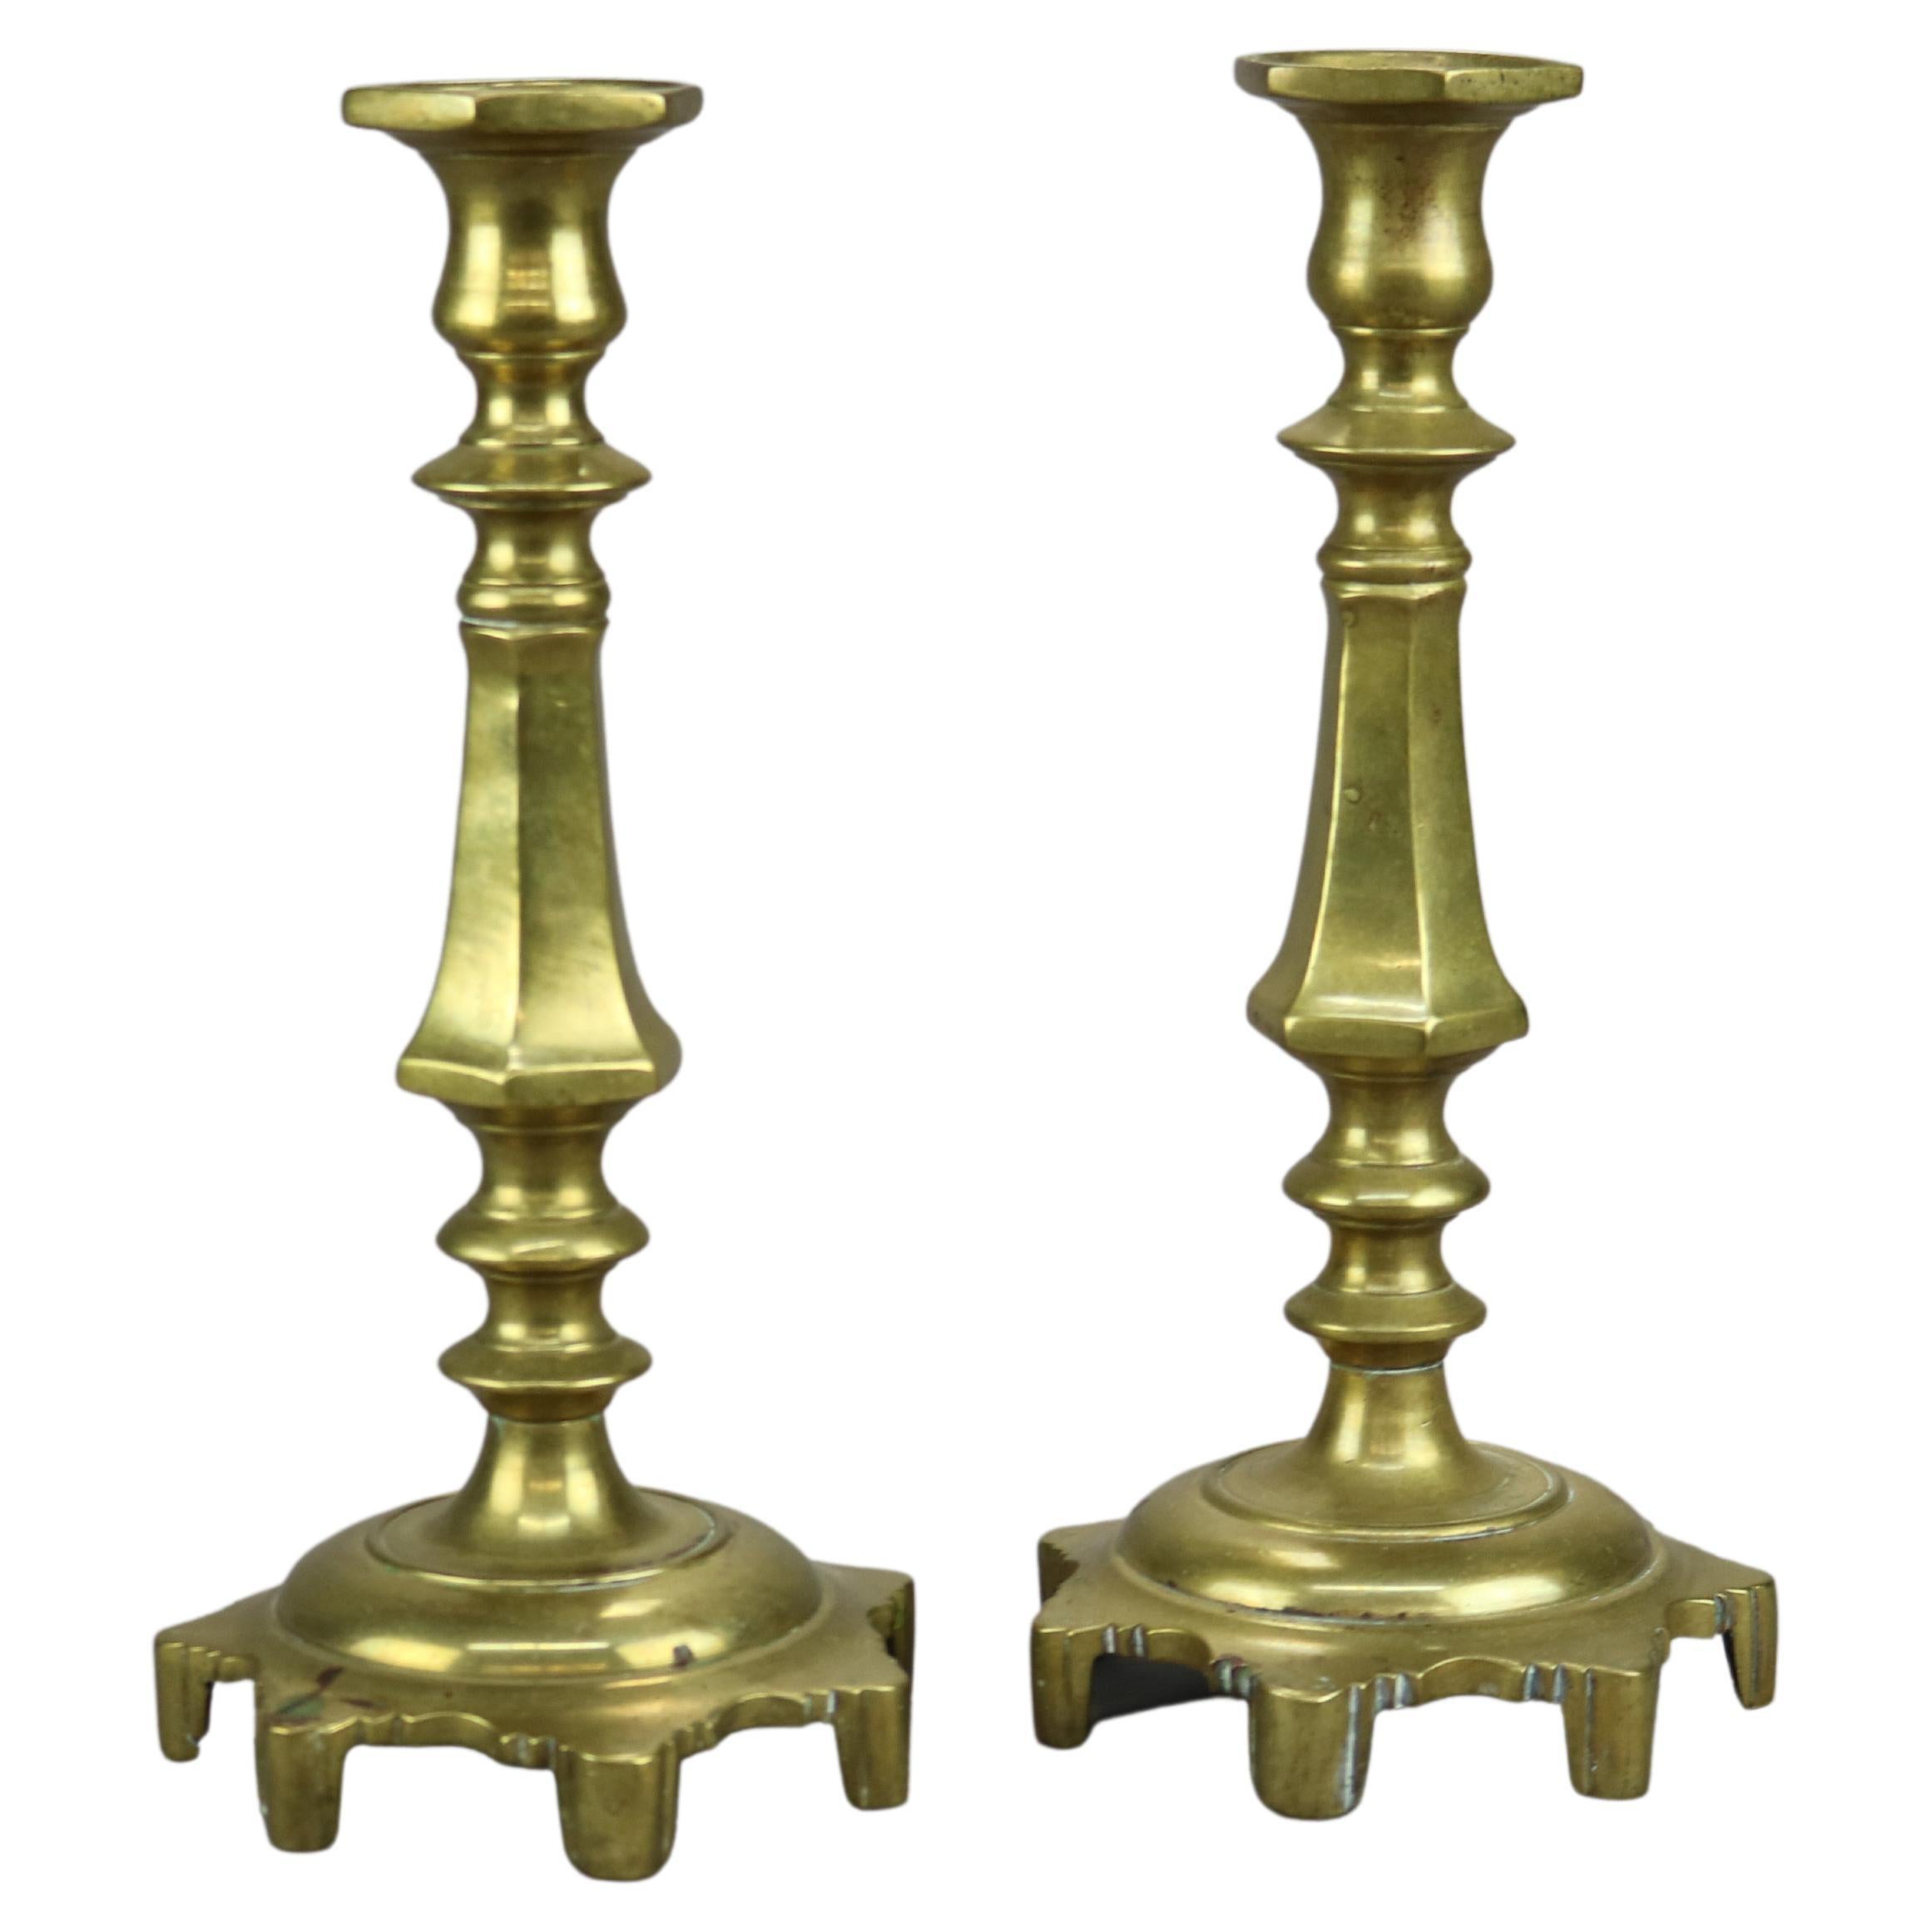 Antique Pair of Early American Brass Balustrade Footed Candlesticks 19th C For Sale